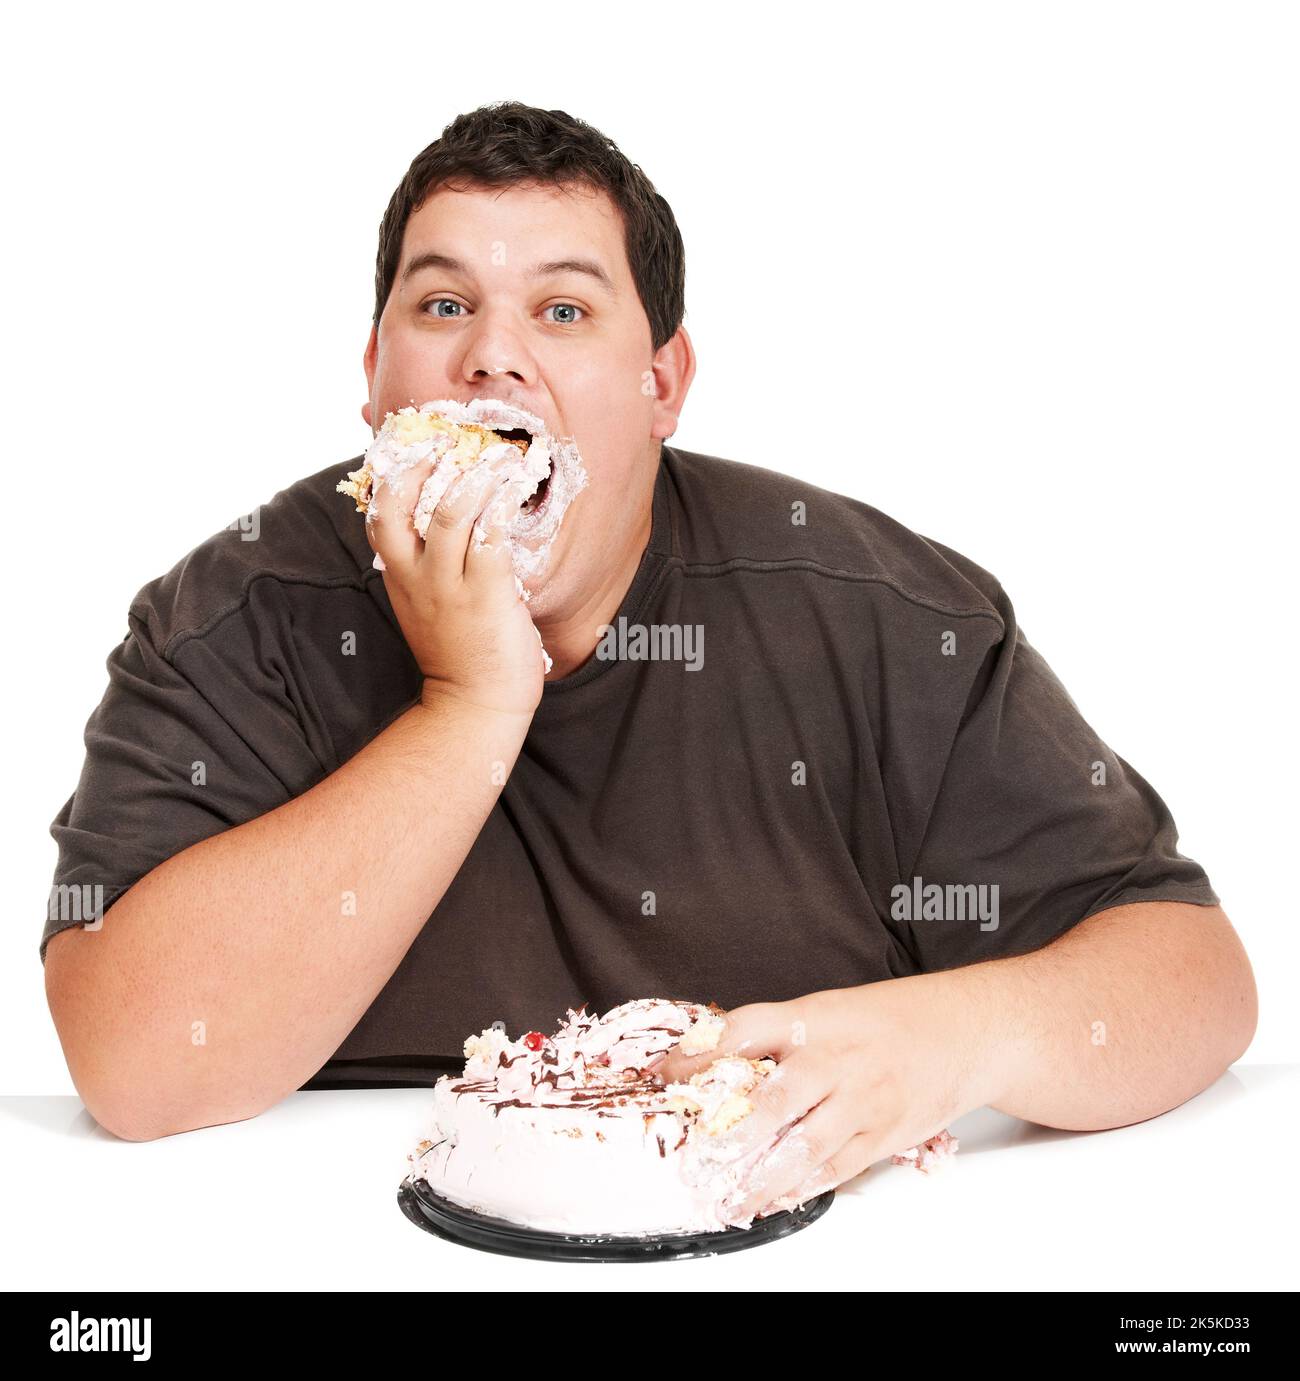 Eating cake in record time. An obese young man stuffing a cake down his face and not being too dainty about it. Stock Photo